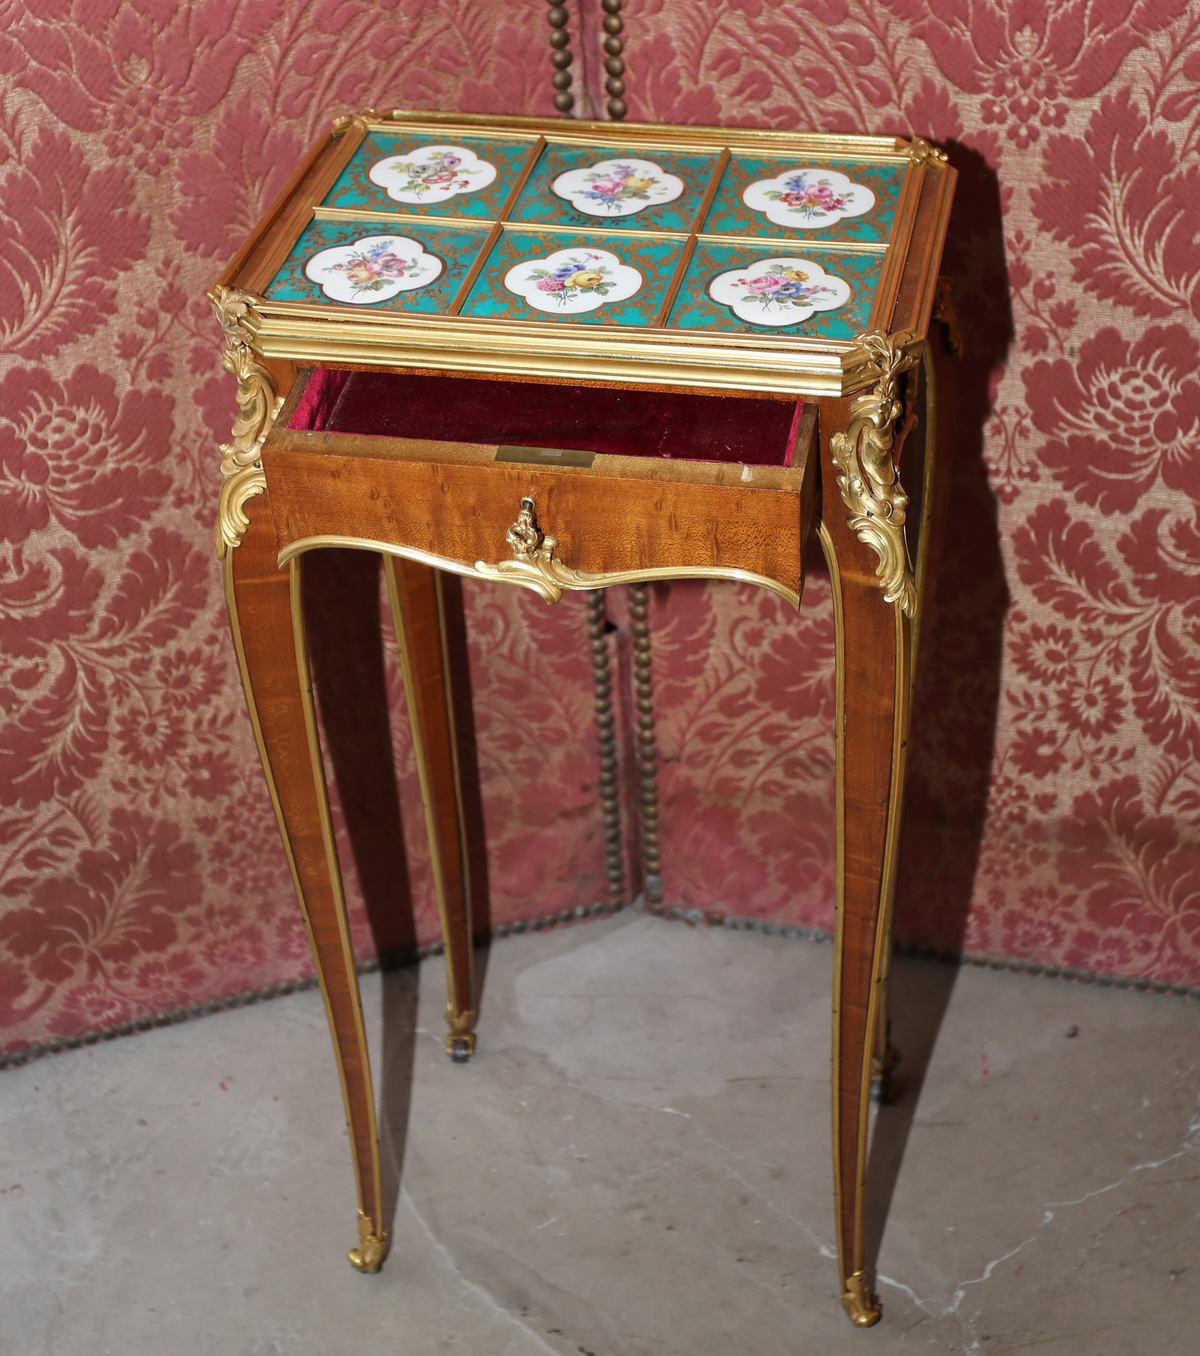 Transition style coffee table, circa 1880